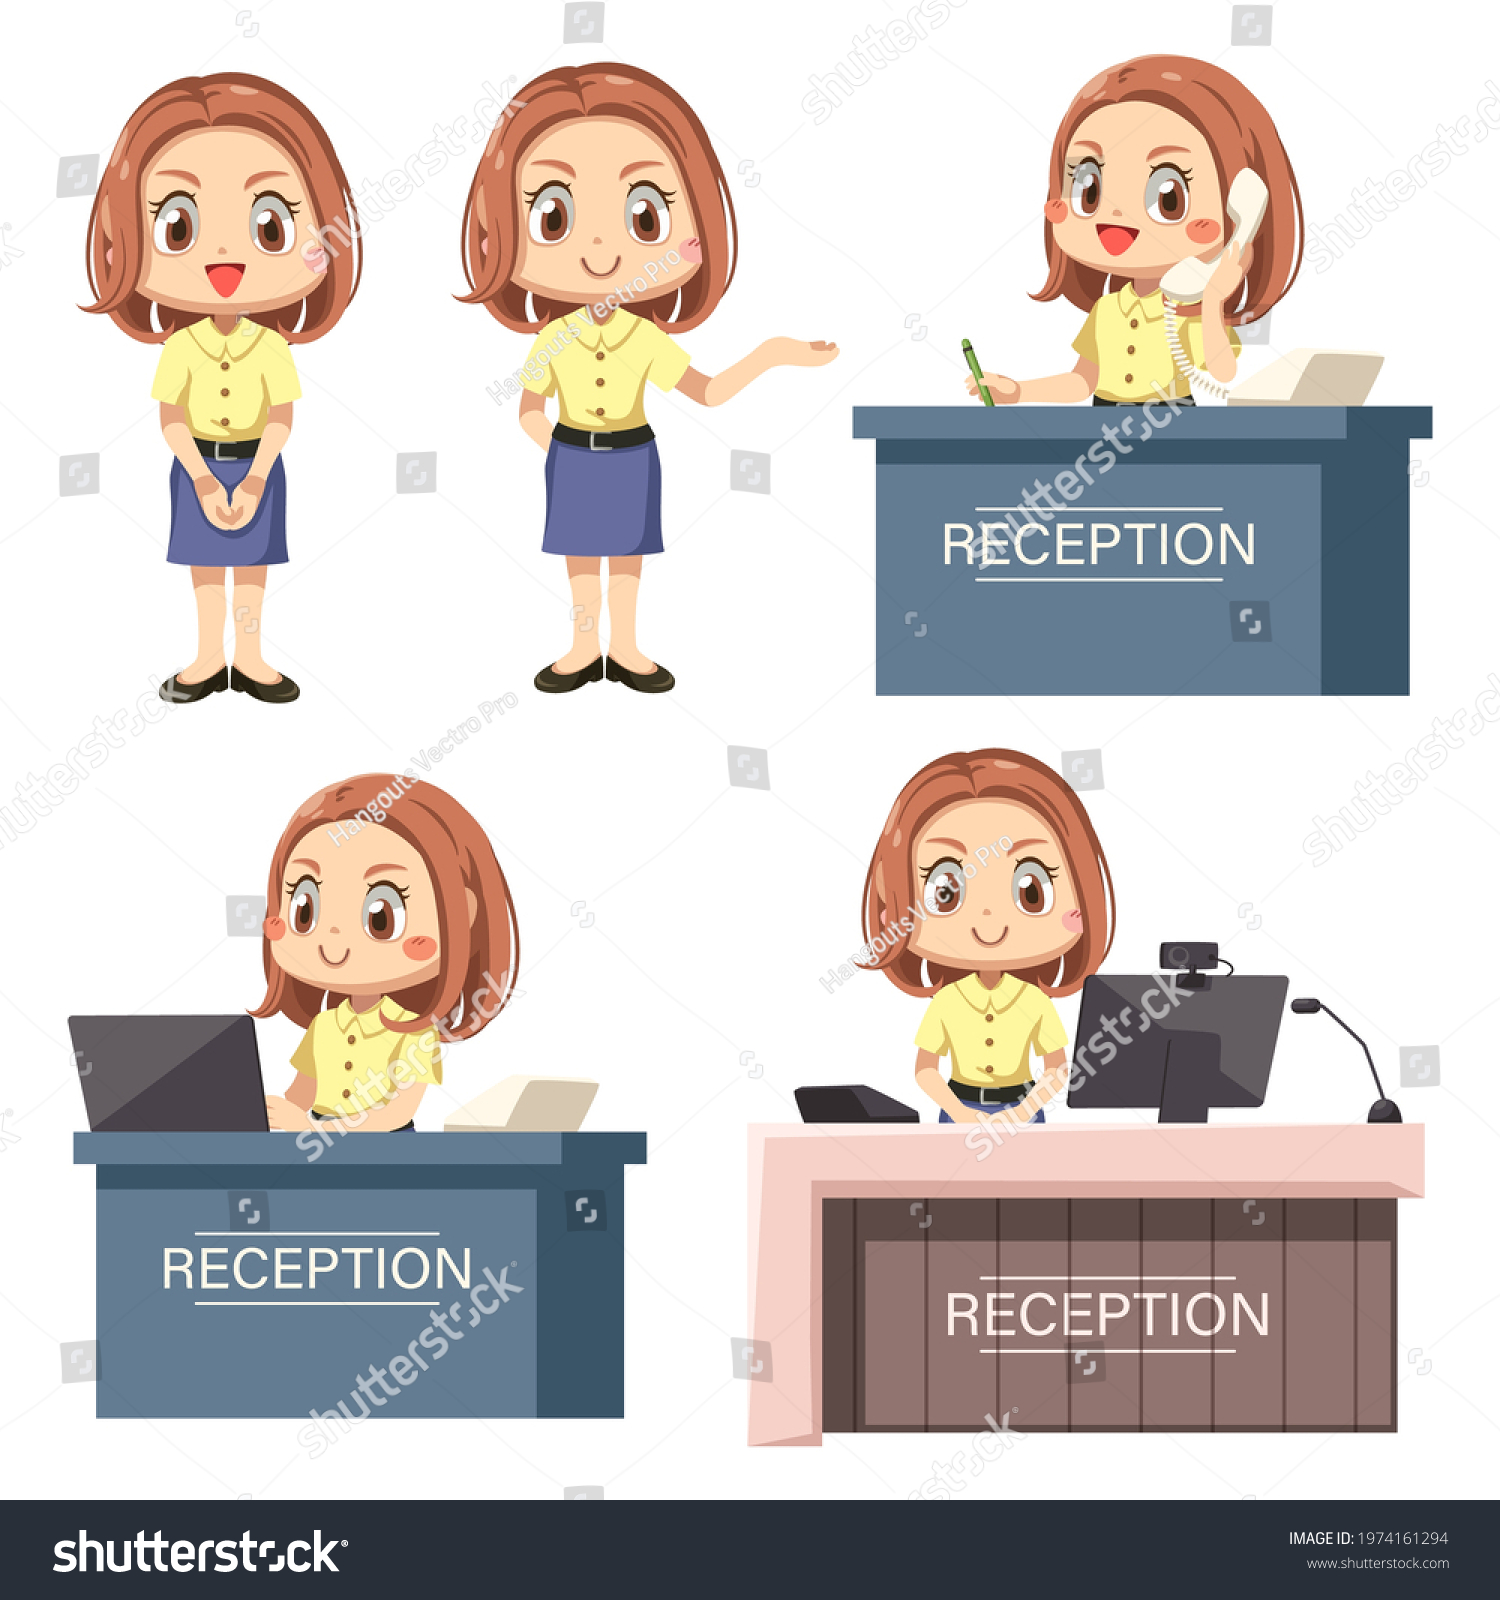 Young Woman Receptionist Stands Reception Desk Stock Vector Royalty Free 1974161294 Shutterstock 2230